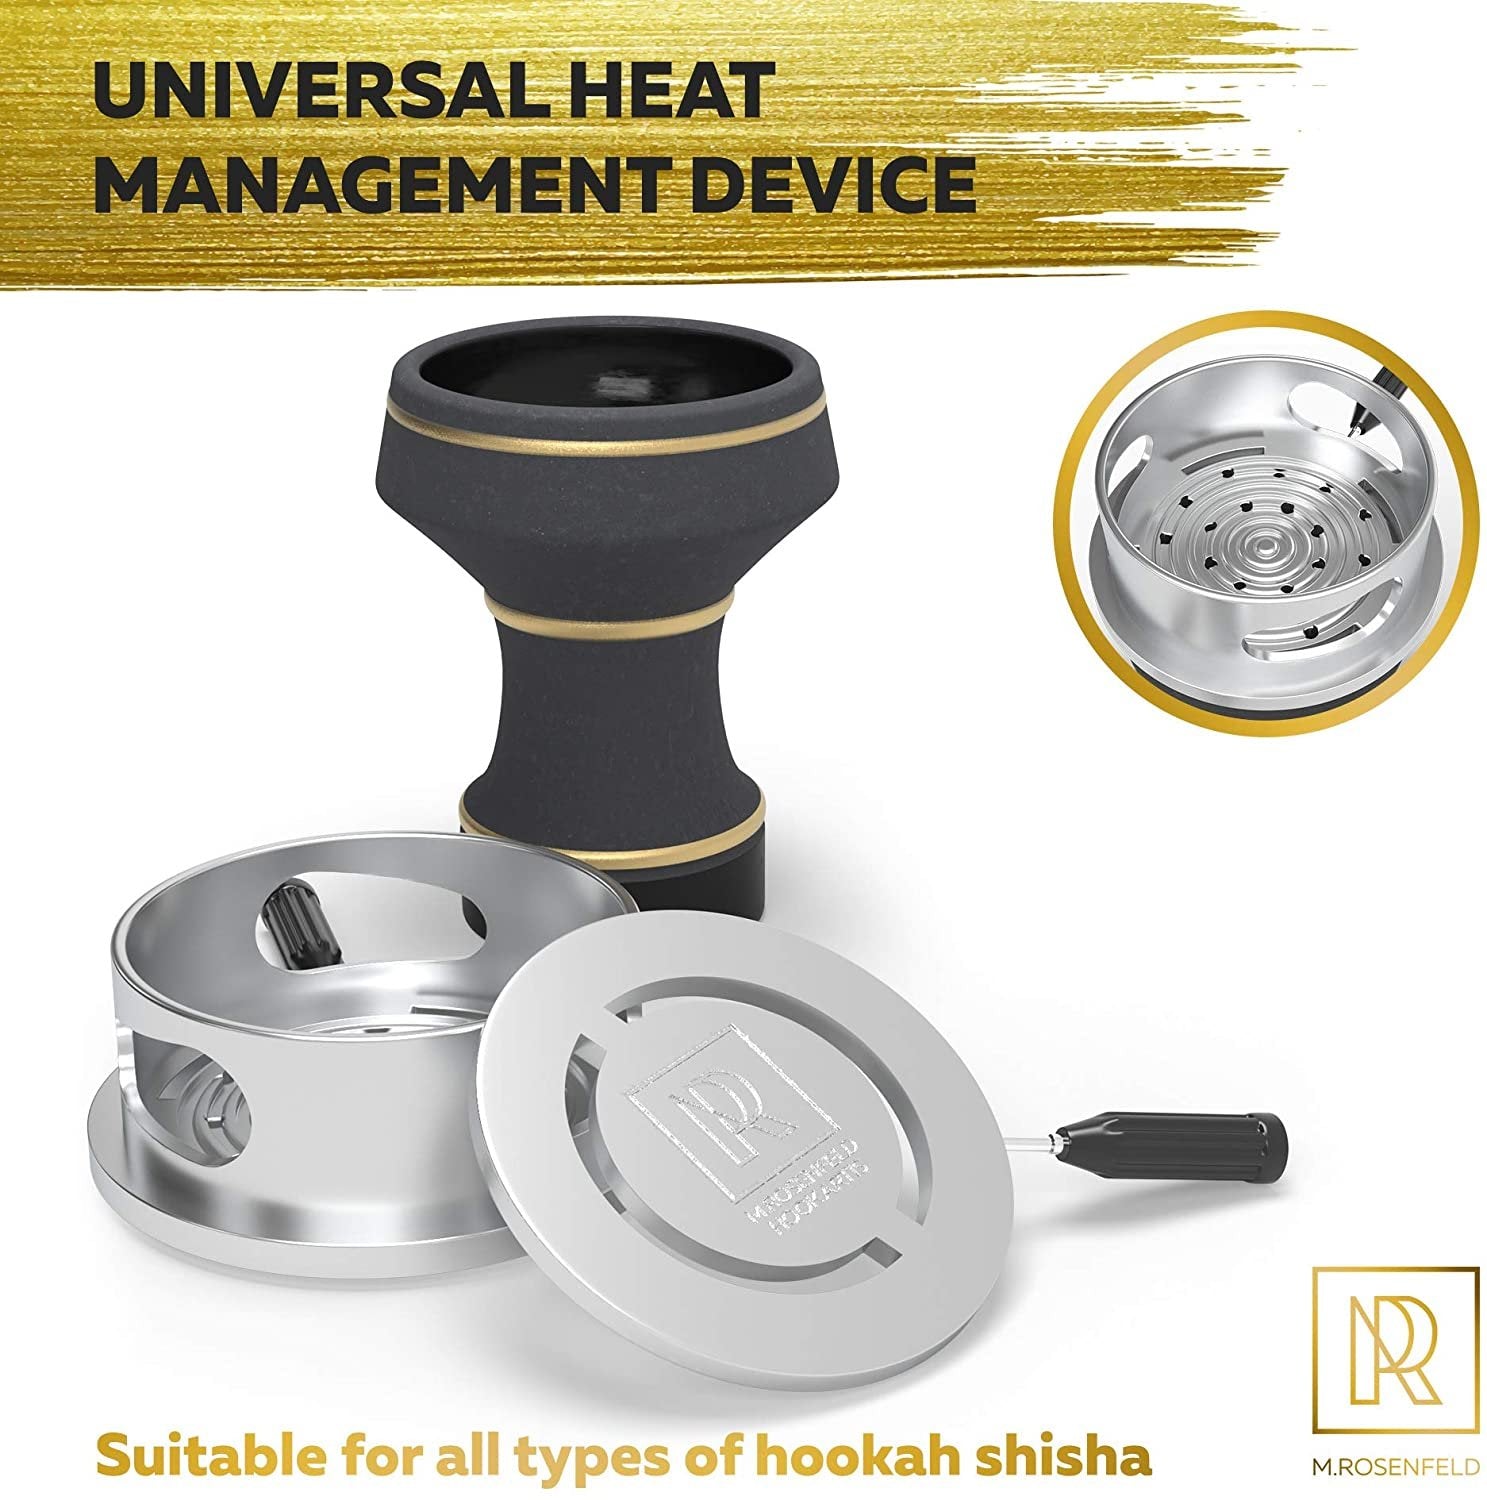 Premium Black Stone Hookah Bowl Set with HMD - Size 1 - Luxury Heat Management, Charcoal Holder & Cover Included